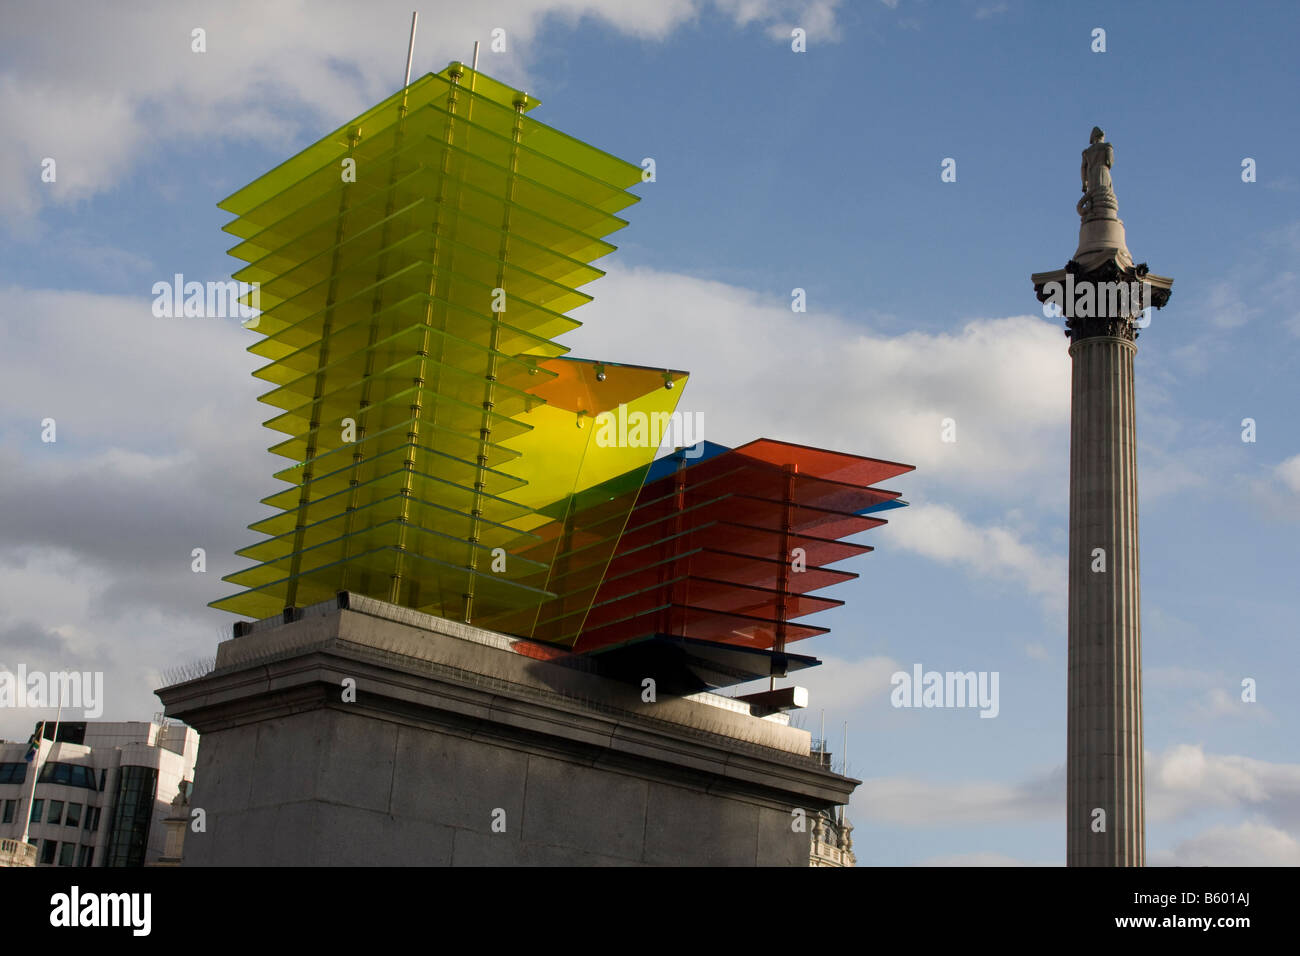 Thomas Schütte’s sculpture “Model for a Hotel 2007” on the Fourth Plinth and Nelson”s Column in Trafalgar Square London GB UK Stock Photo